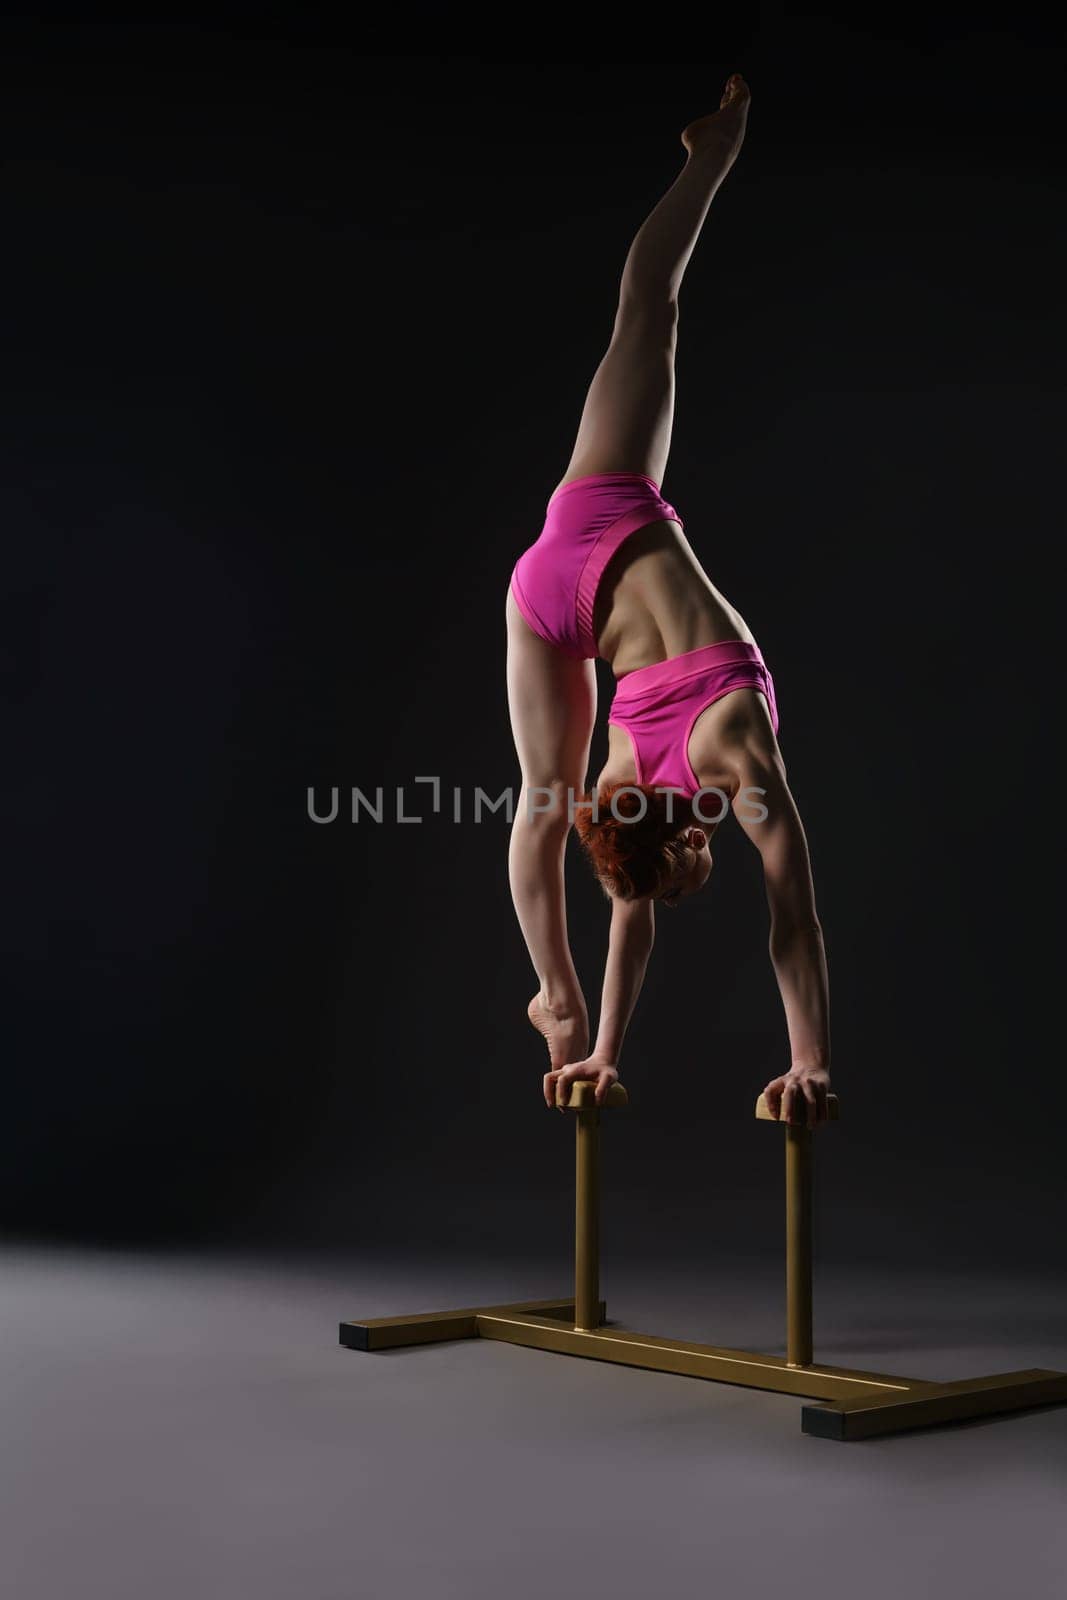 Tightrope walker training. Photo on gray background